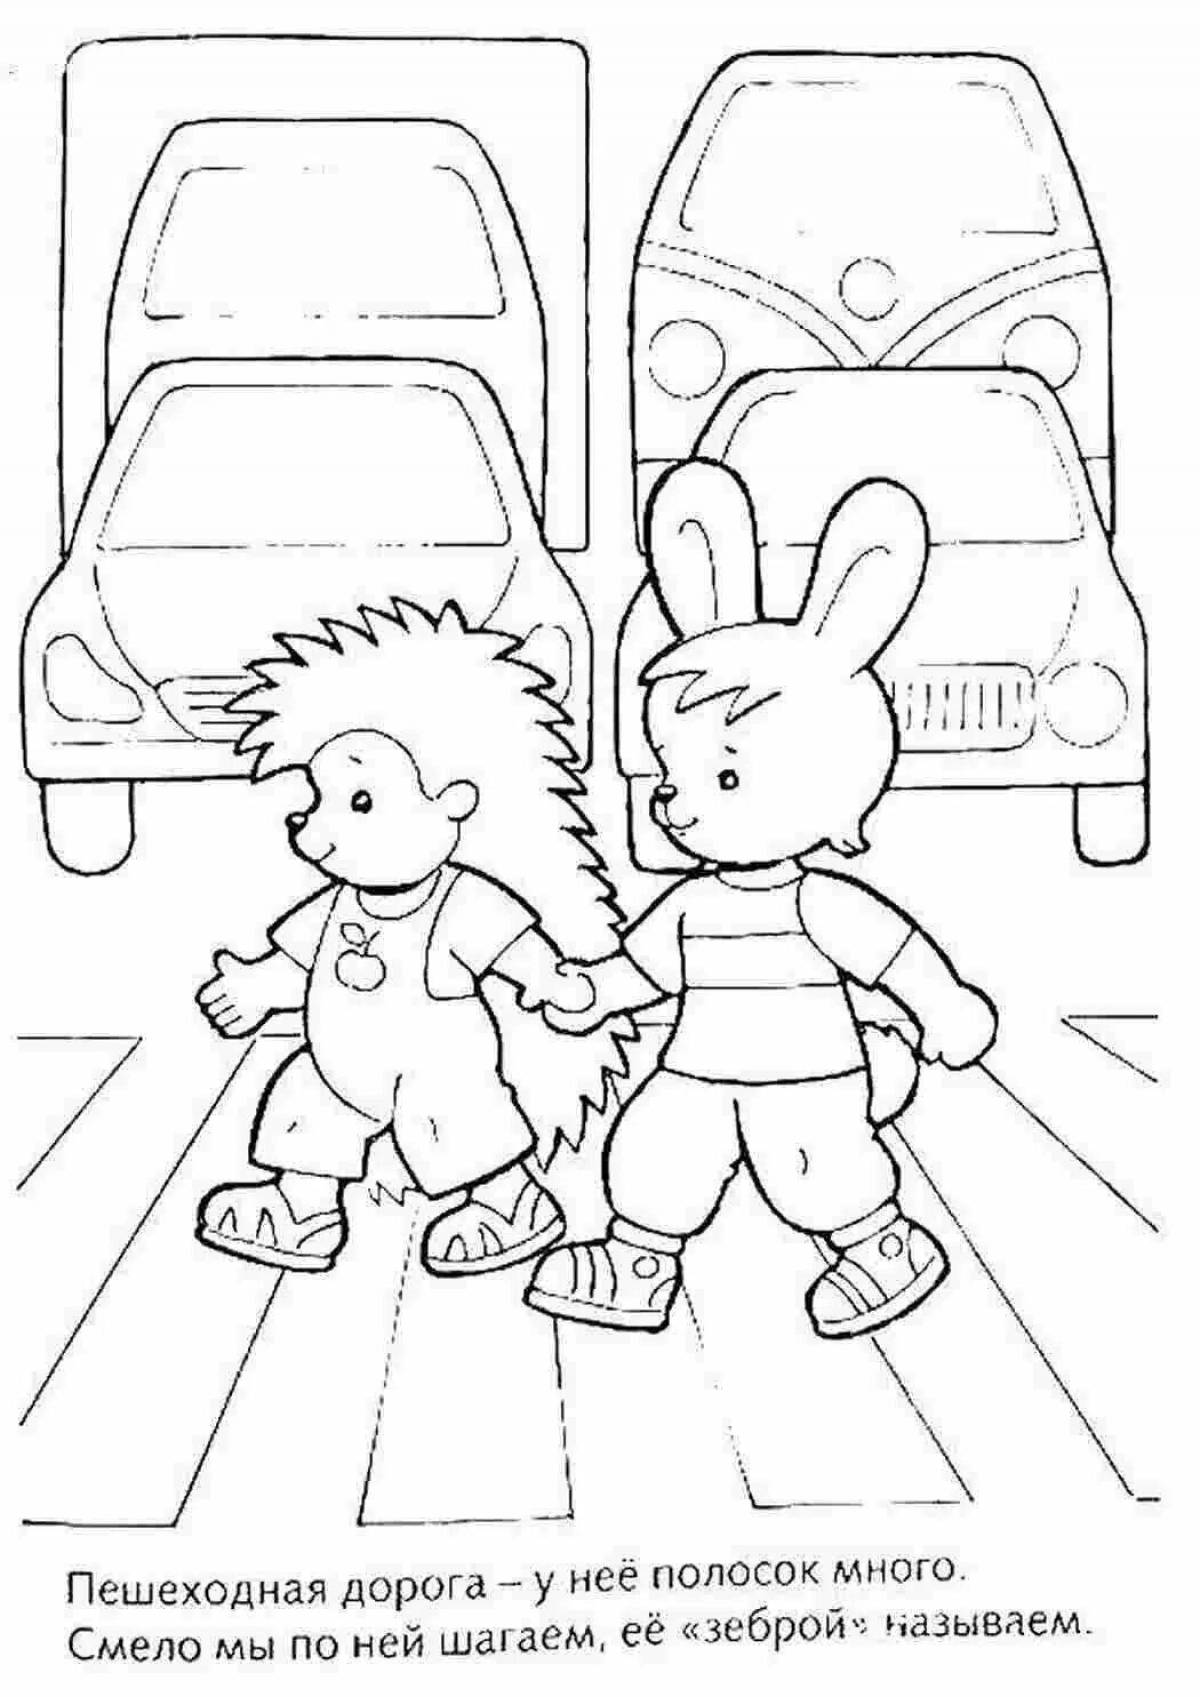 Coloring page joyful winter road for kids